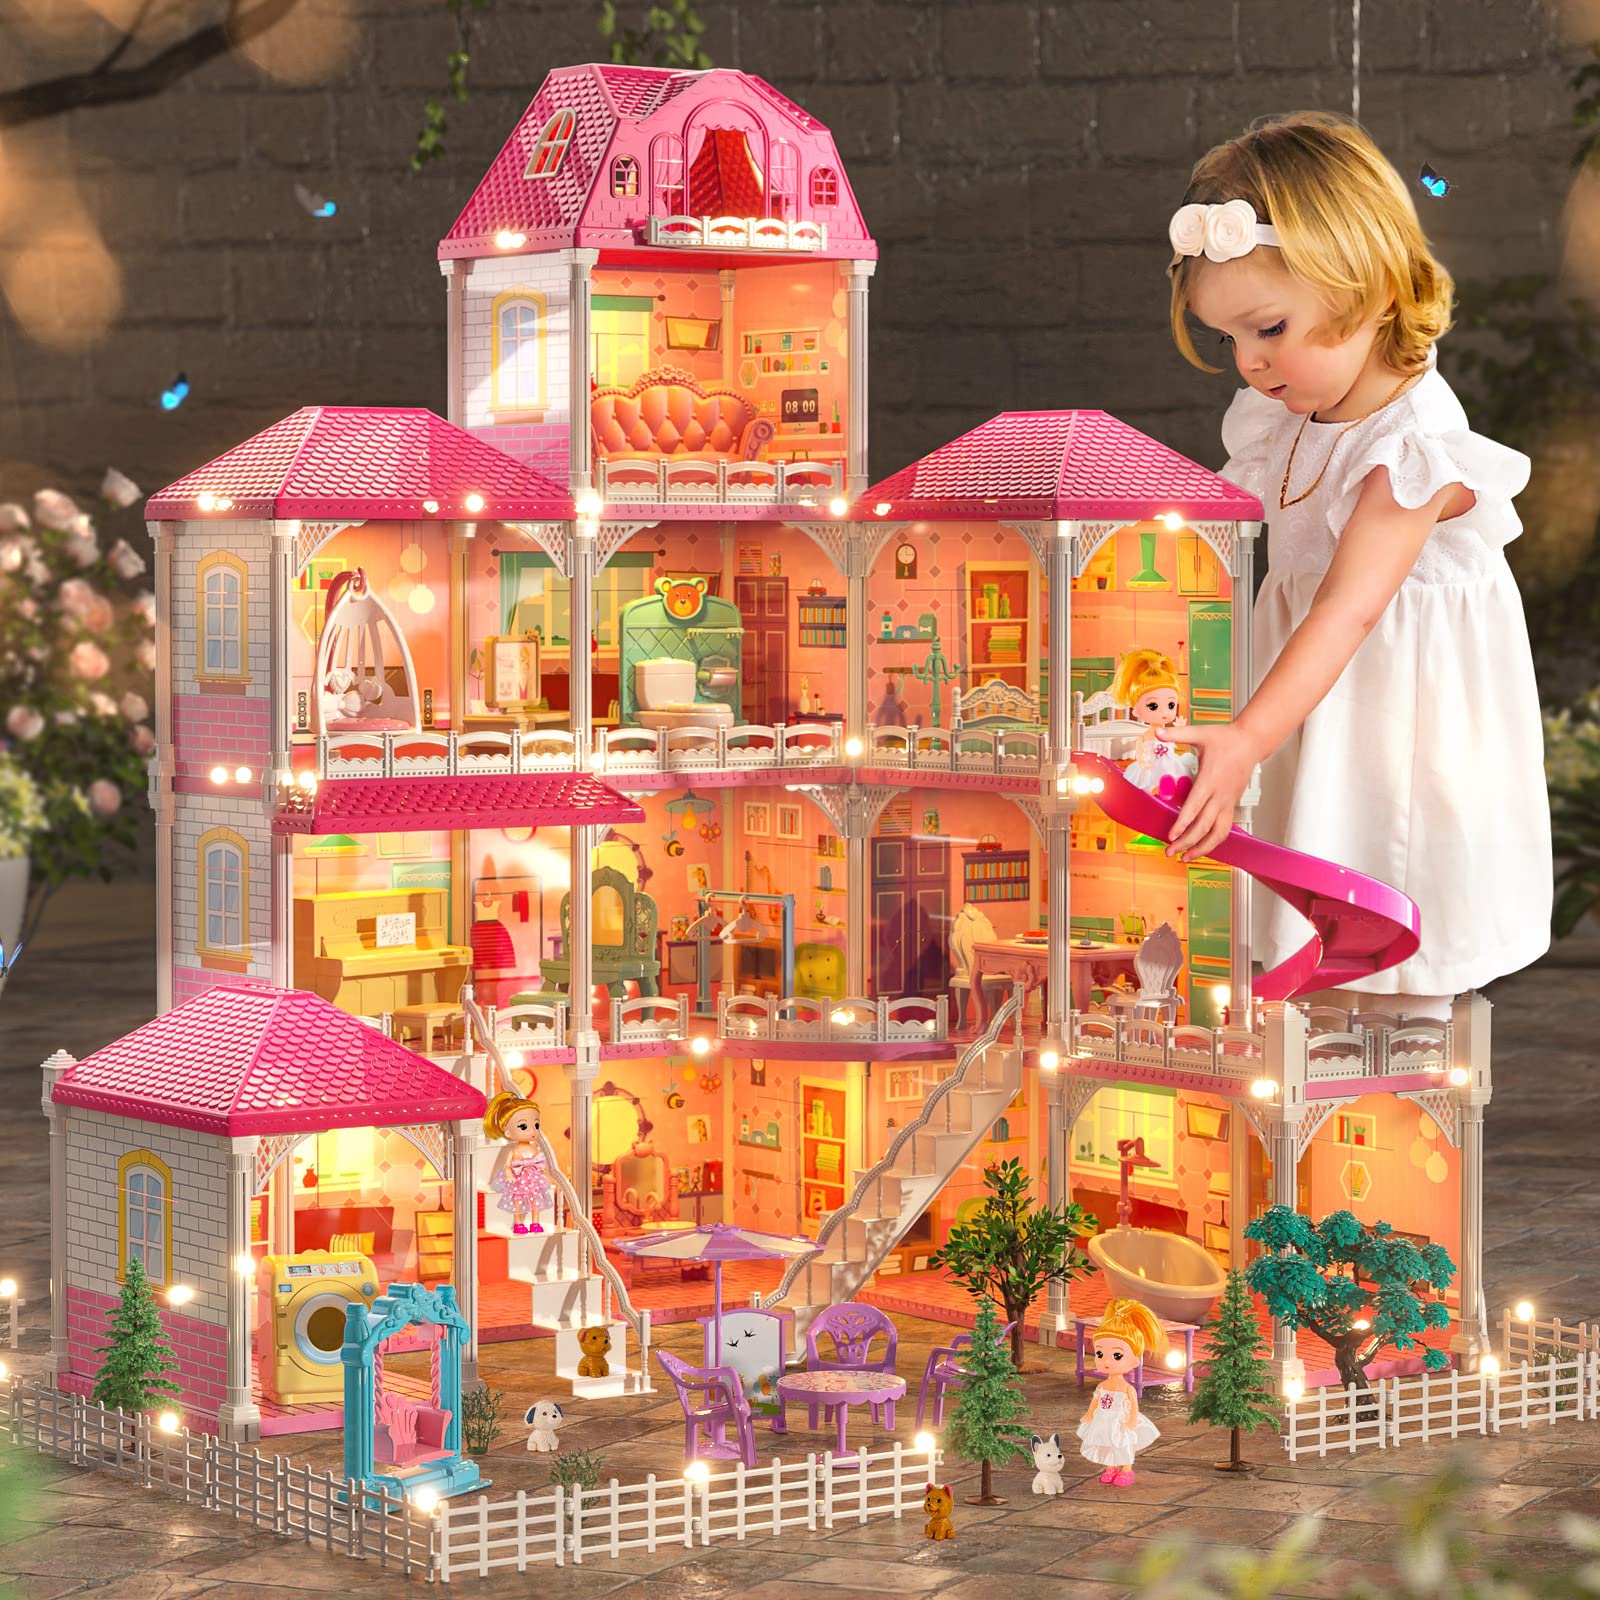 TEMI Doll House Dreamhouse for Girls,Boys - 4-Story 12 Rooms Playhouse with 2 Dolls Toy Figures, Fully Furnished Fashion Dollhouse, Play House with Accessories, Gift Toy for Kids Ages 3 4 5 6 7 8+